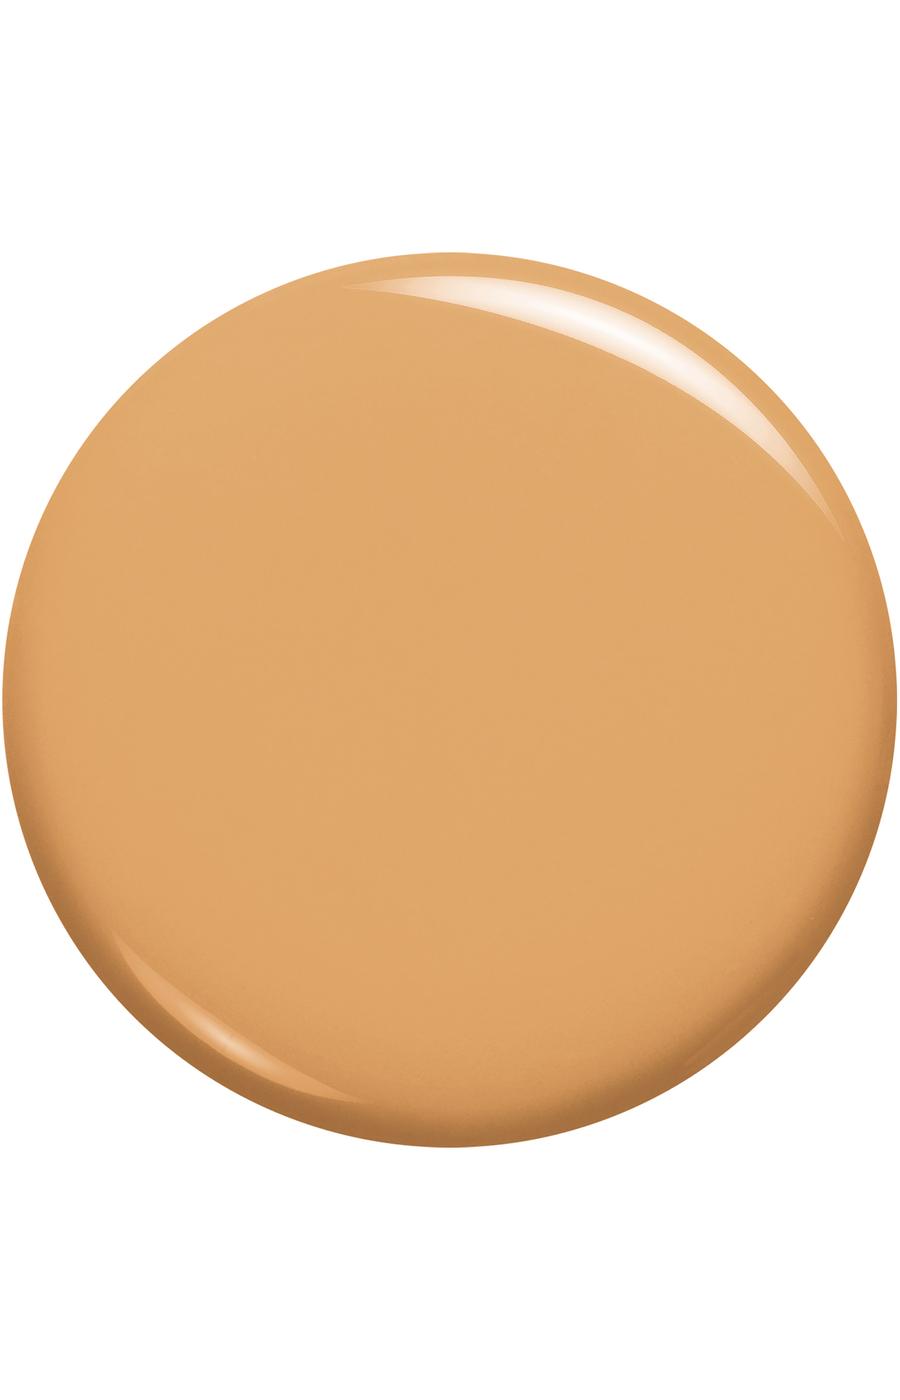 L'Oréal Paris Infallible Up to 24 Hour Fresh Wear Foundation - Lightweight Toasted Almond; image 7 of 7